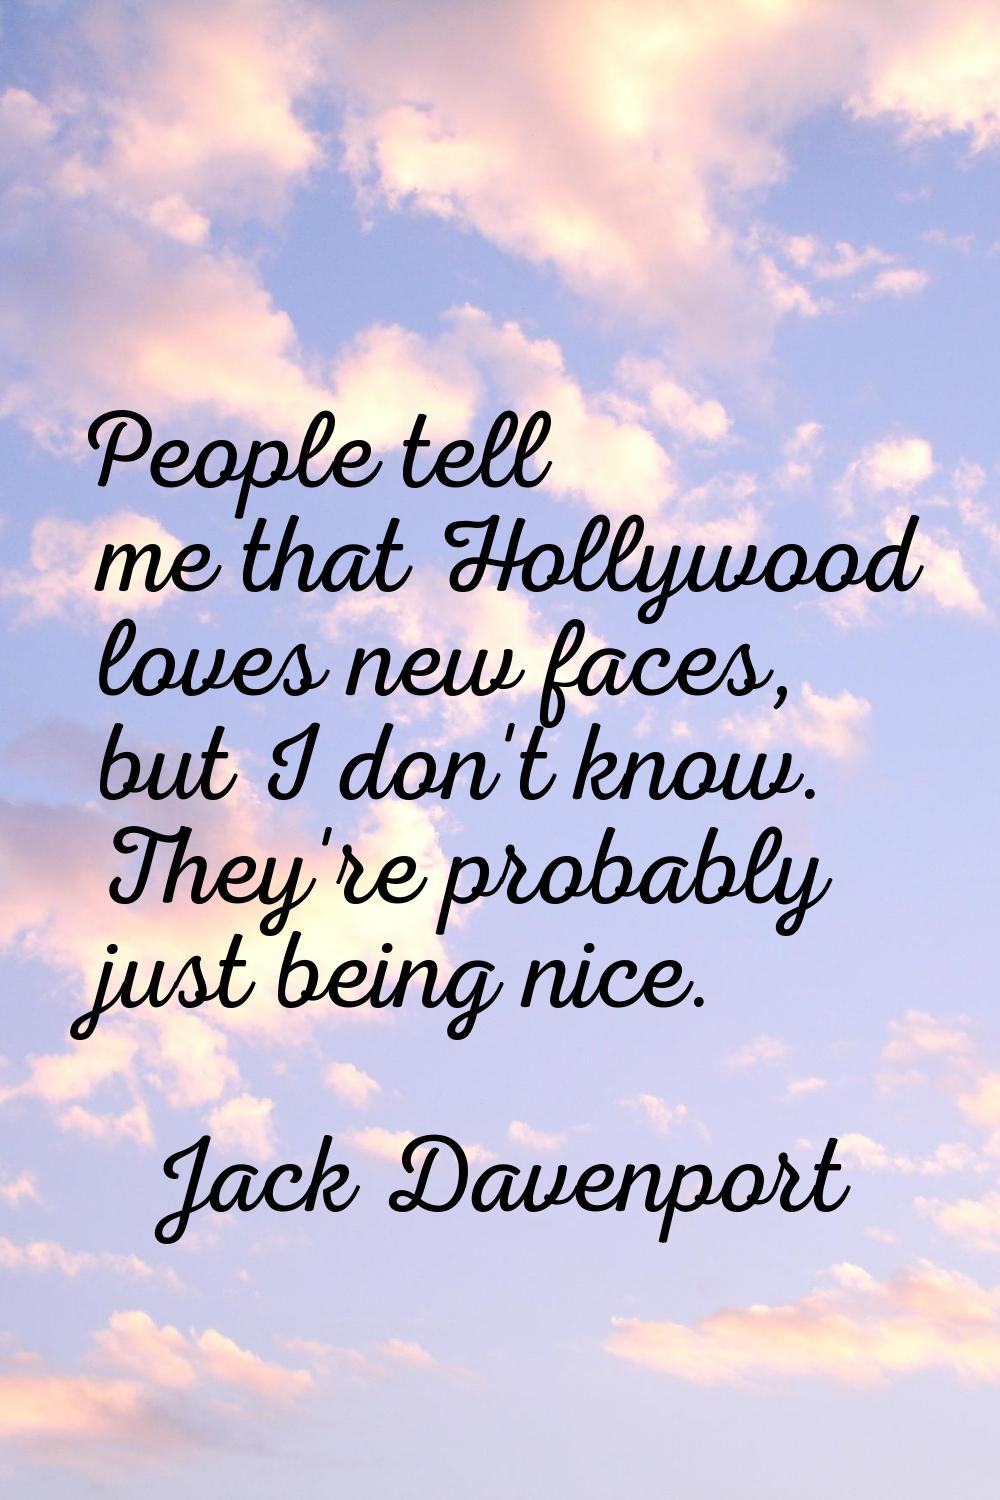 People tell me that Hollywood loves new faces, but I don't know. They're probably just being nice.